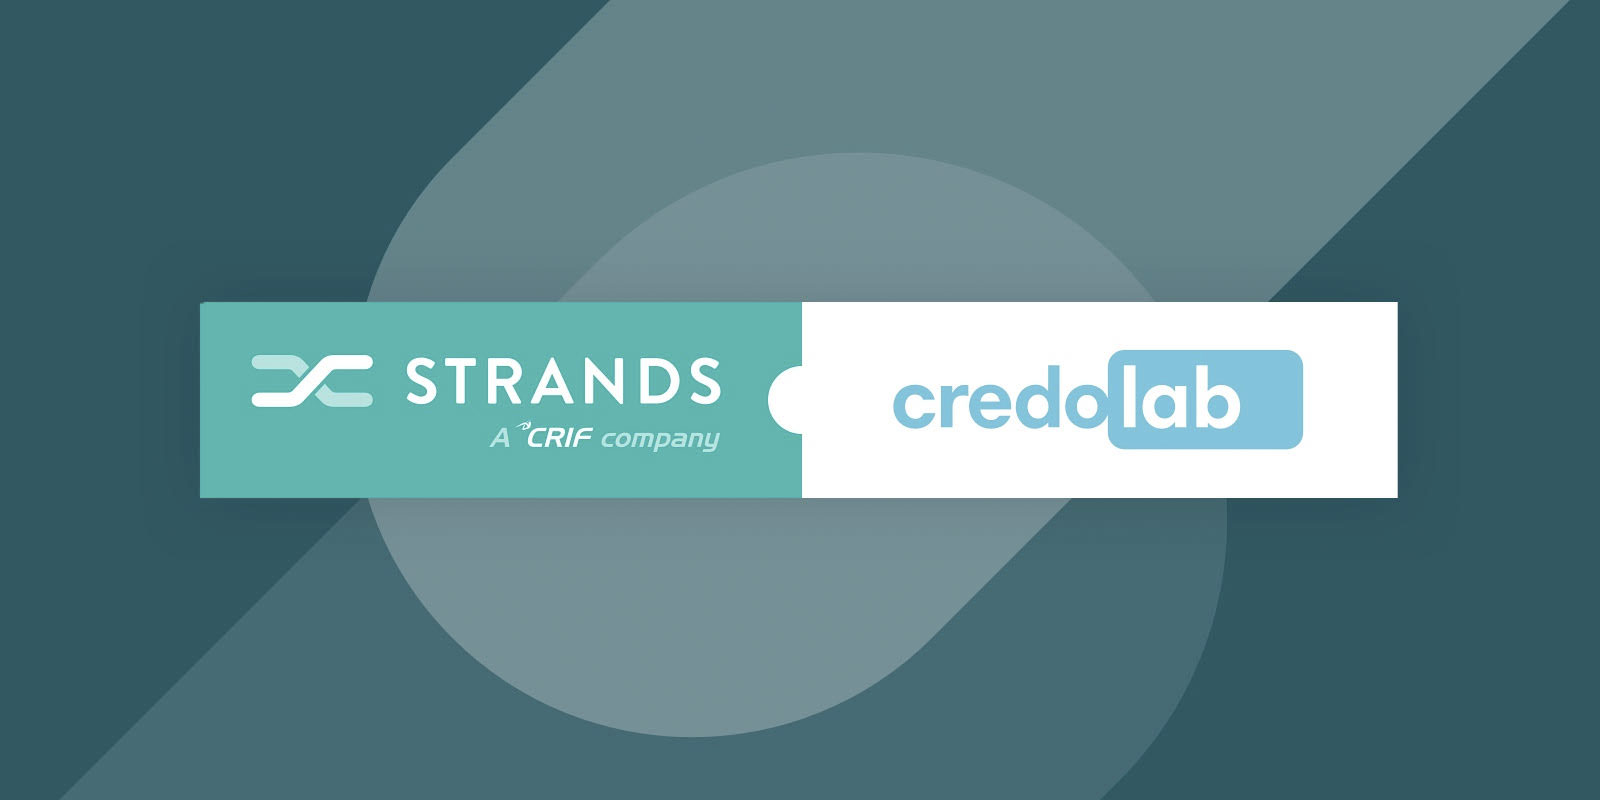 Strands Partners with Credolab to Make Smart Money Management Smarter